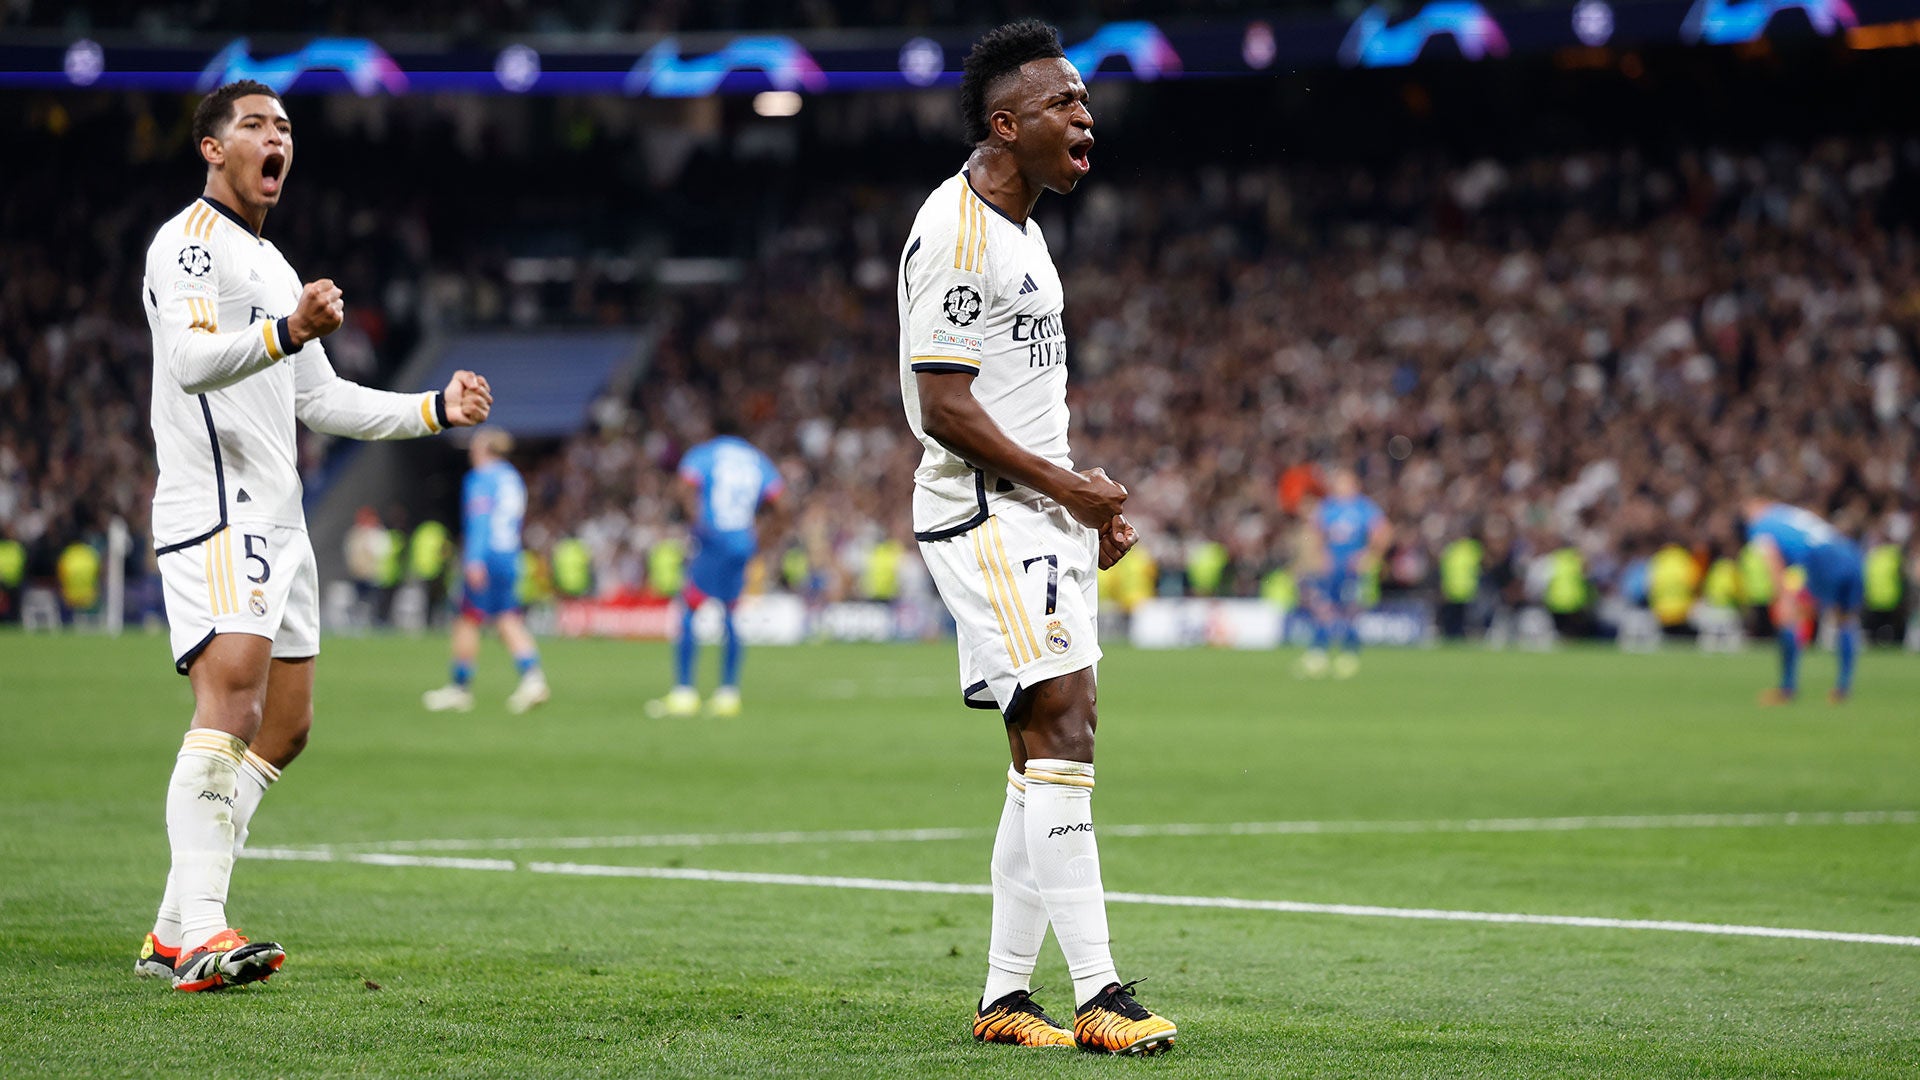 Real Madrid through to Champions League quarter-finals